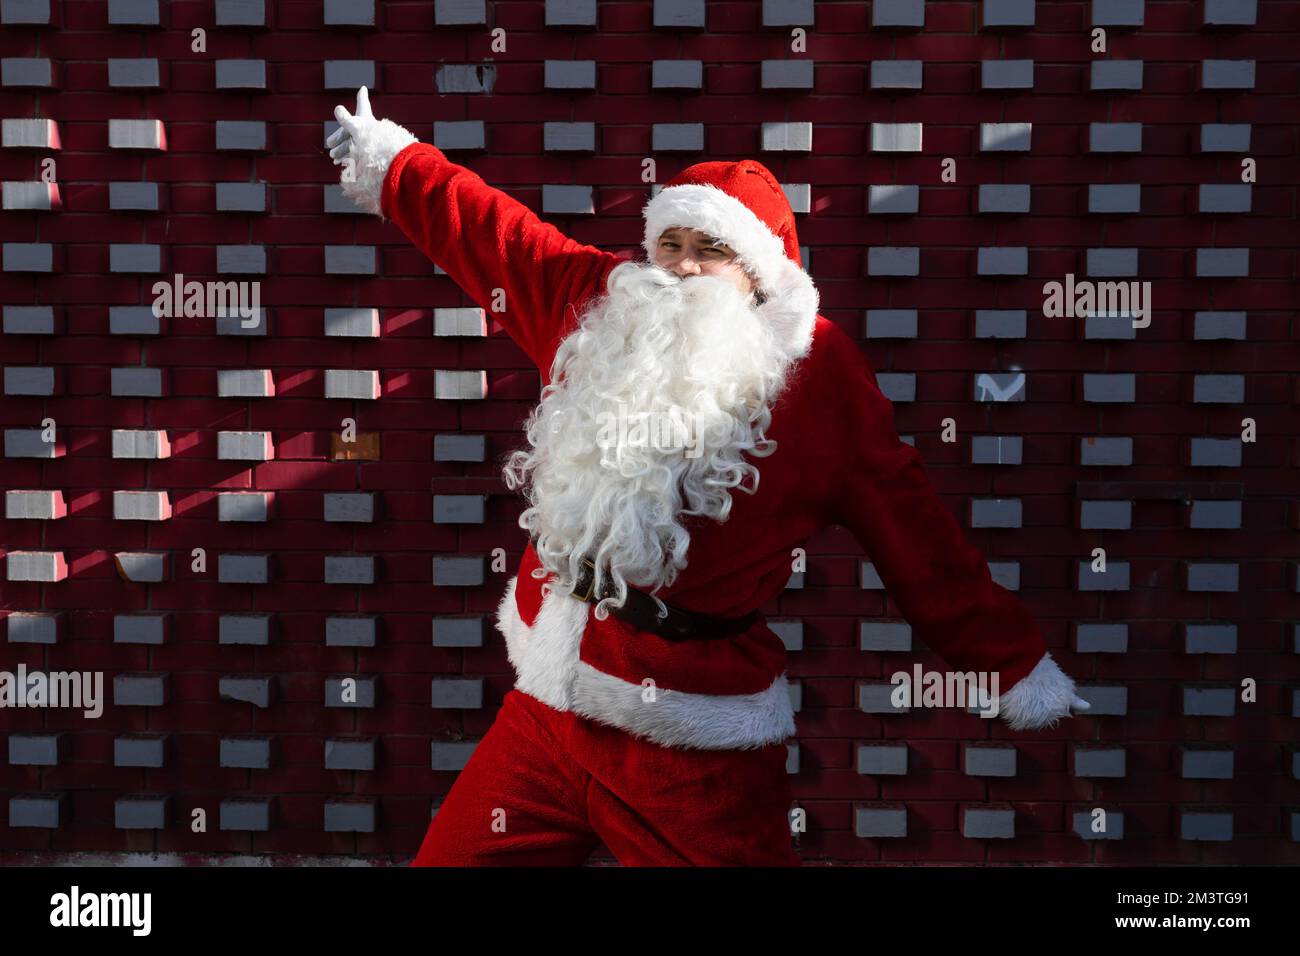 Santa Claus in the dancing pose in front of a red and white wall Stock ...